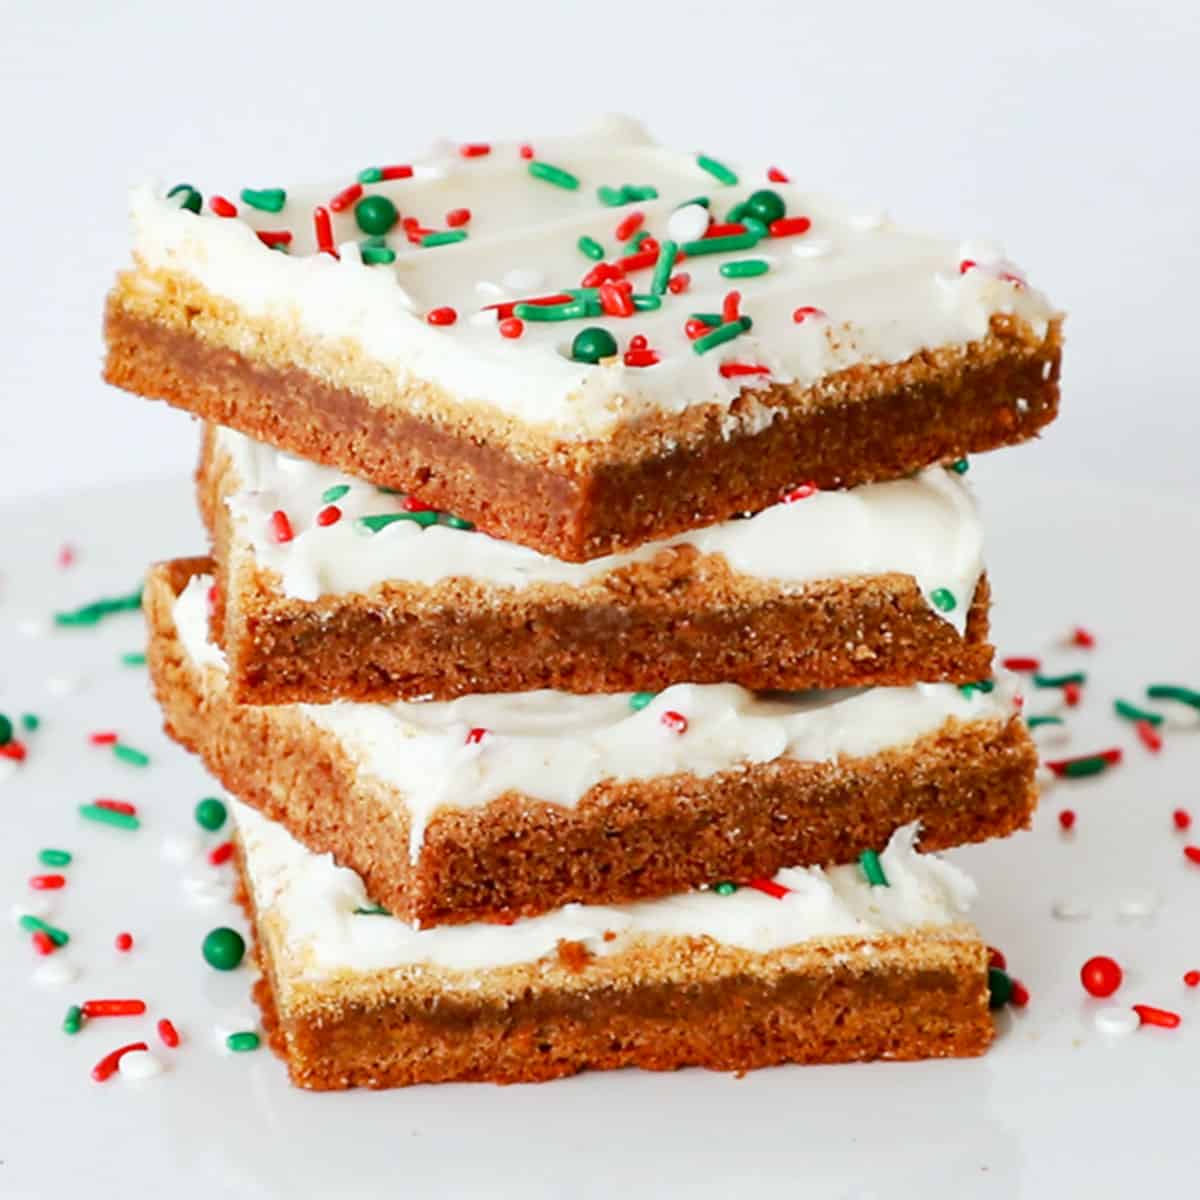 Gingerbread cookie bars with red and green sprinkles, spiced gingerbread.